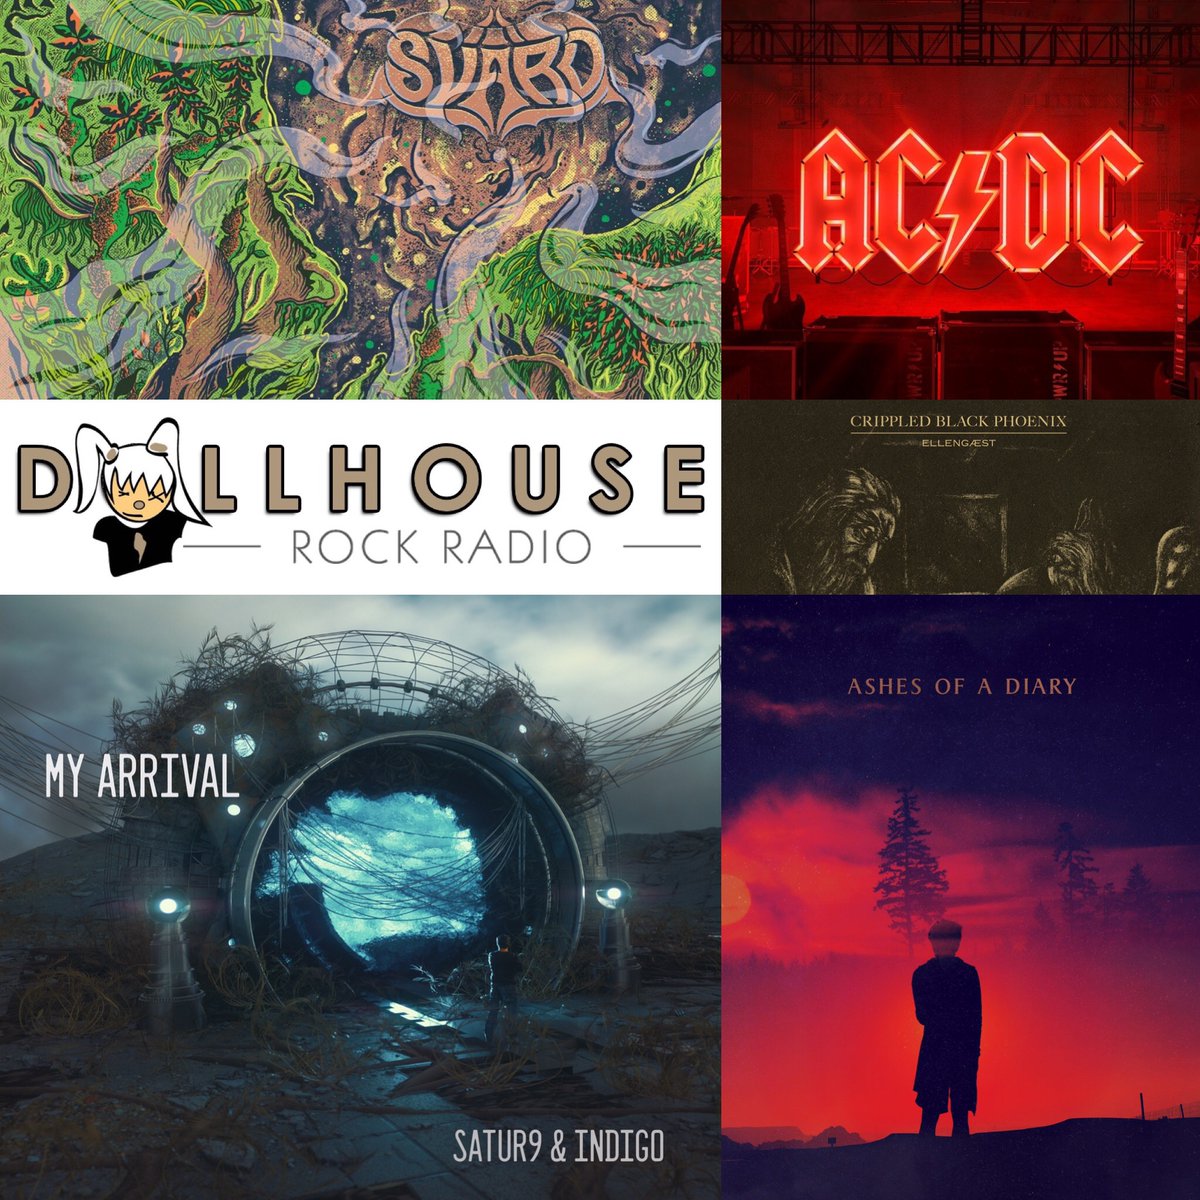 ⚠️Join us tonight 8-10 pm (CET) live.vibradio.nl for a show with new work from AC⚡️DC, Crippled Black Phoenix, Dreaming Madmen and Vulkan! Also a special concept album from the band My Arrival @acdc @CBP_Official @DreamingMadmen @Vulkanband @MyArrival #LiveRadio